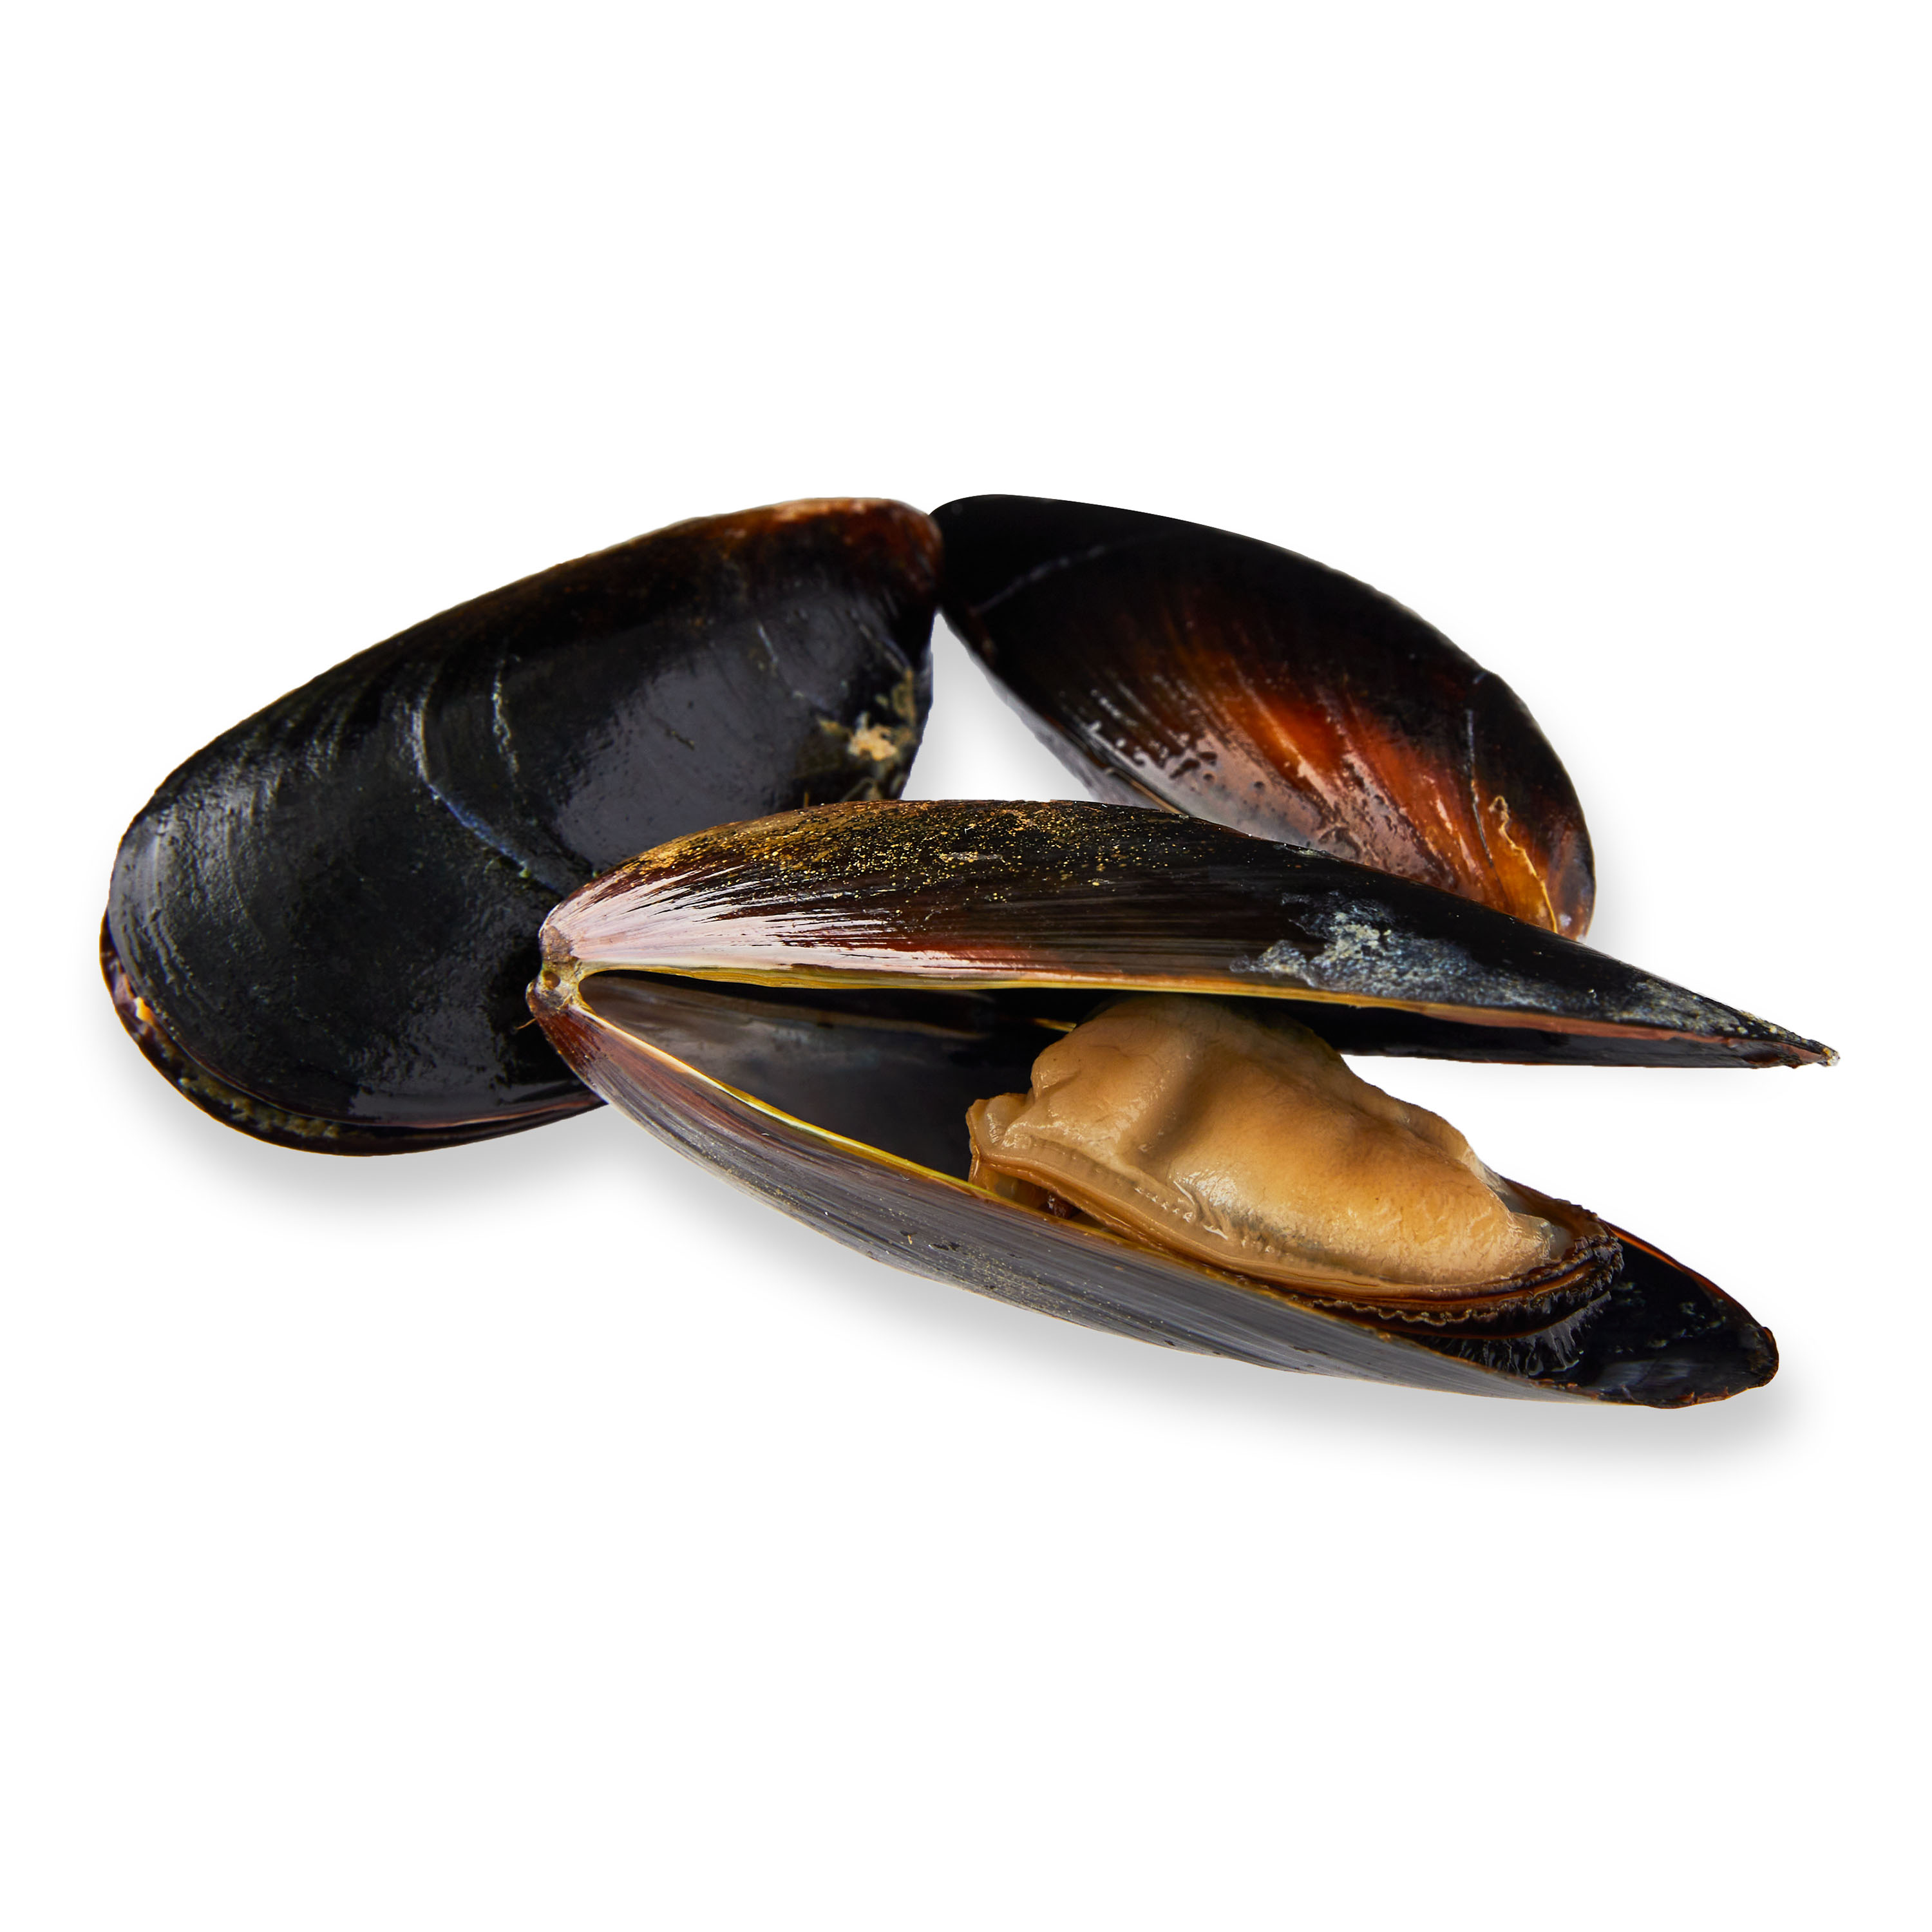 Sams Choice Frozen Mussels 2lb - image 3 of 9